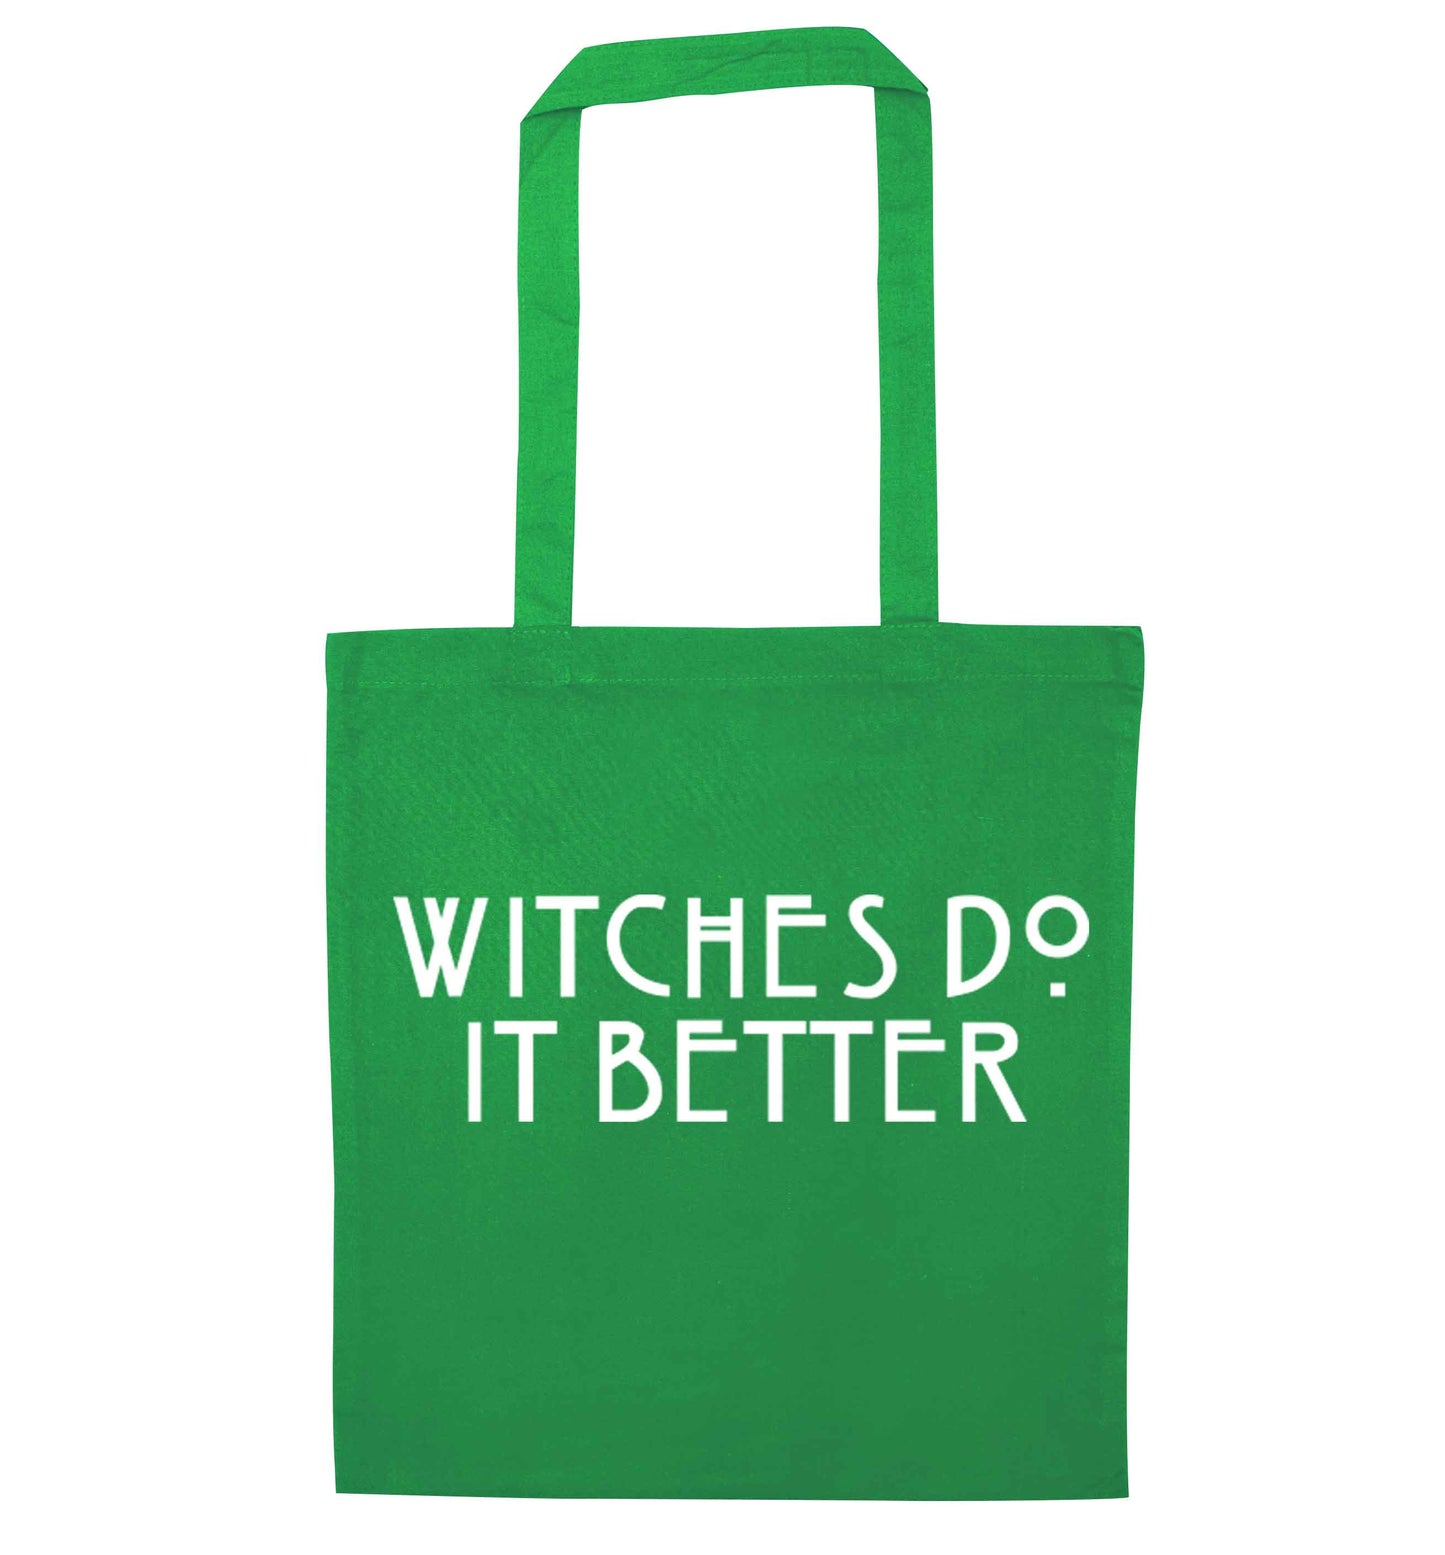 Witches do it better green tote bag